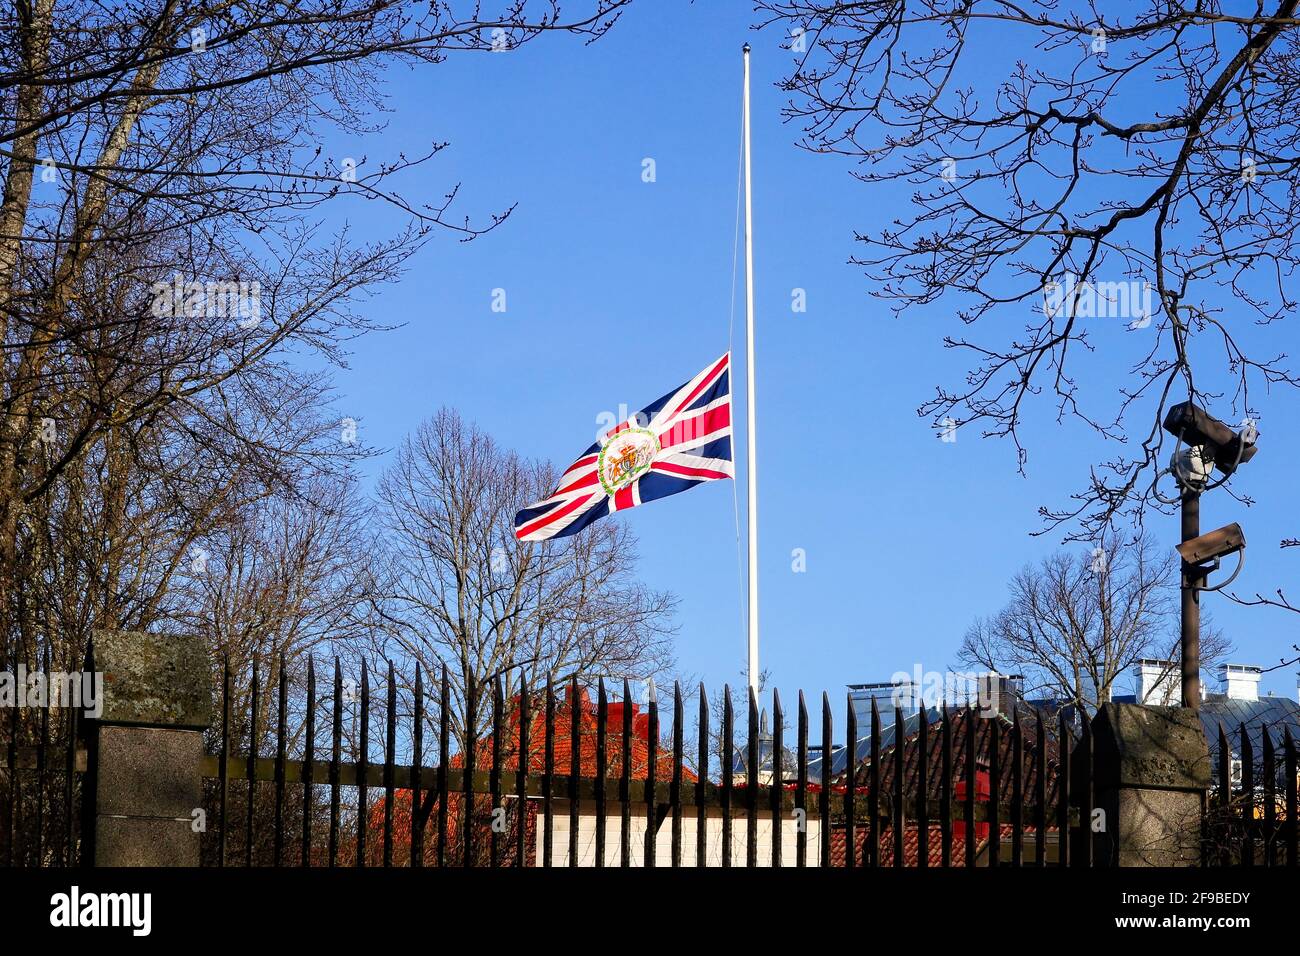 Helsinki, Finland. 17th April, 2021. Duke of Edinburgh Funeral Day. British diplomatic flag fly at half mast as a sign of respect to the passing of HRH Prince Philip, aged 99 on 9th April 2021, outside the British Embassy in Helsinki, Finland. Credit: Taina Sohlman Stock Photo